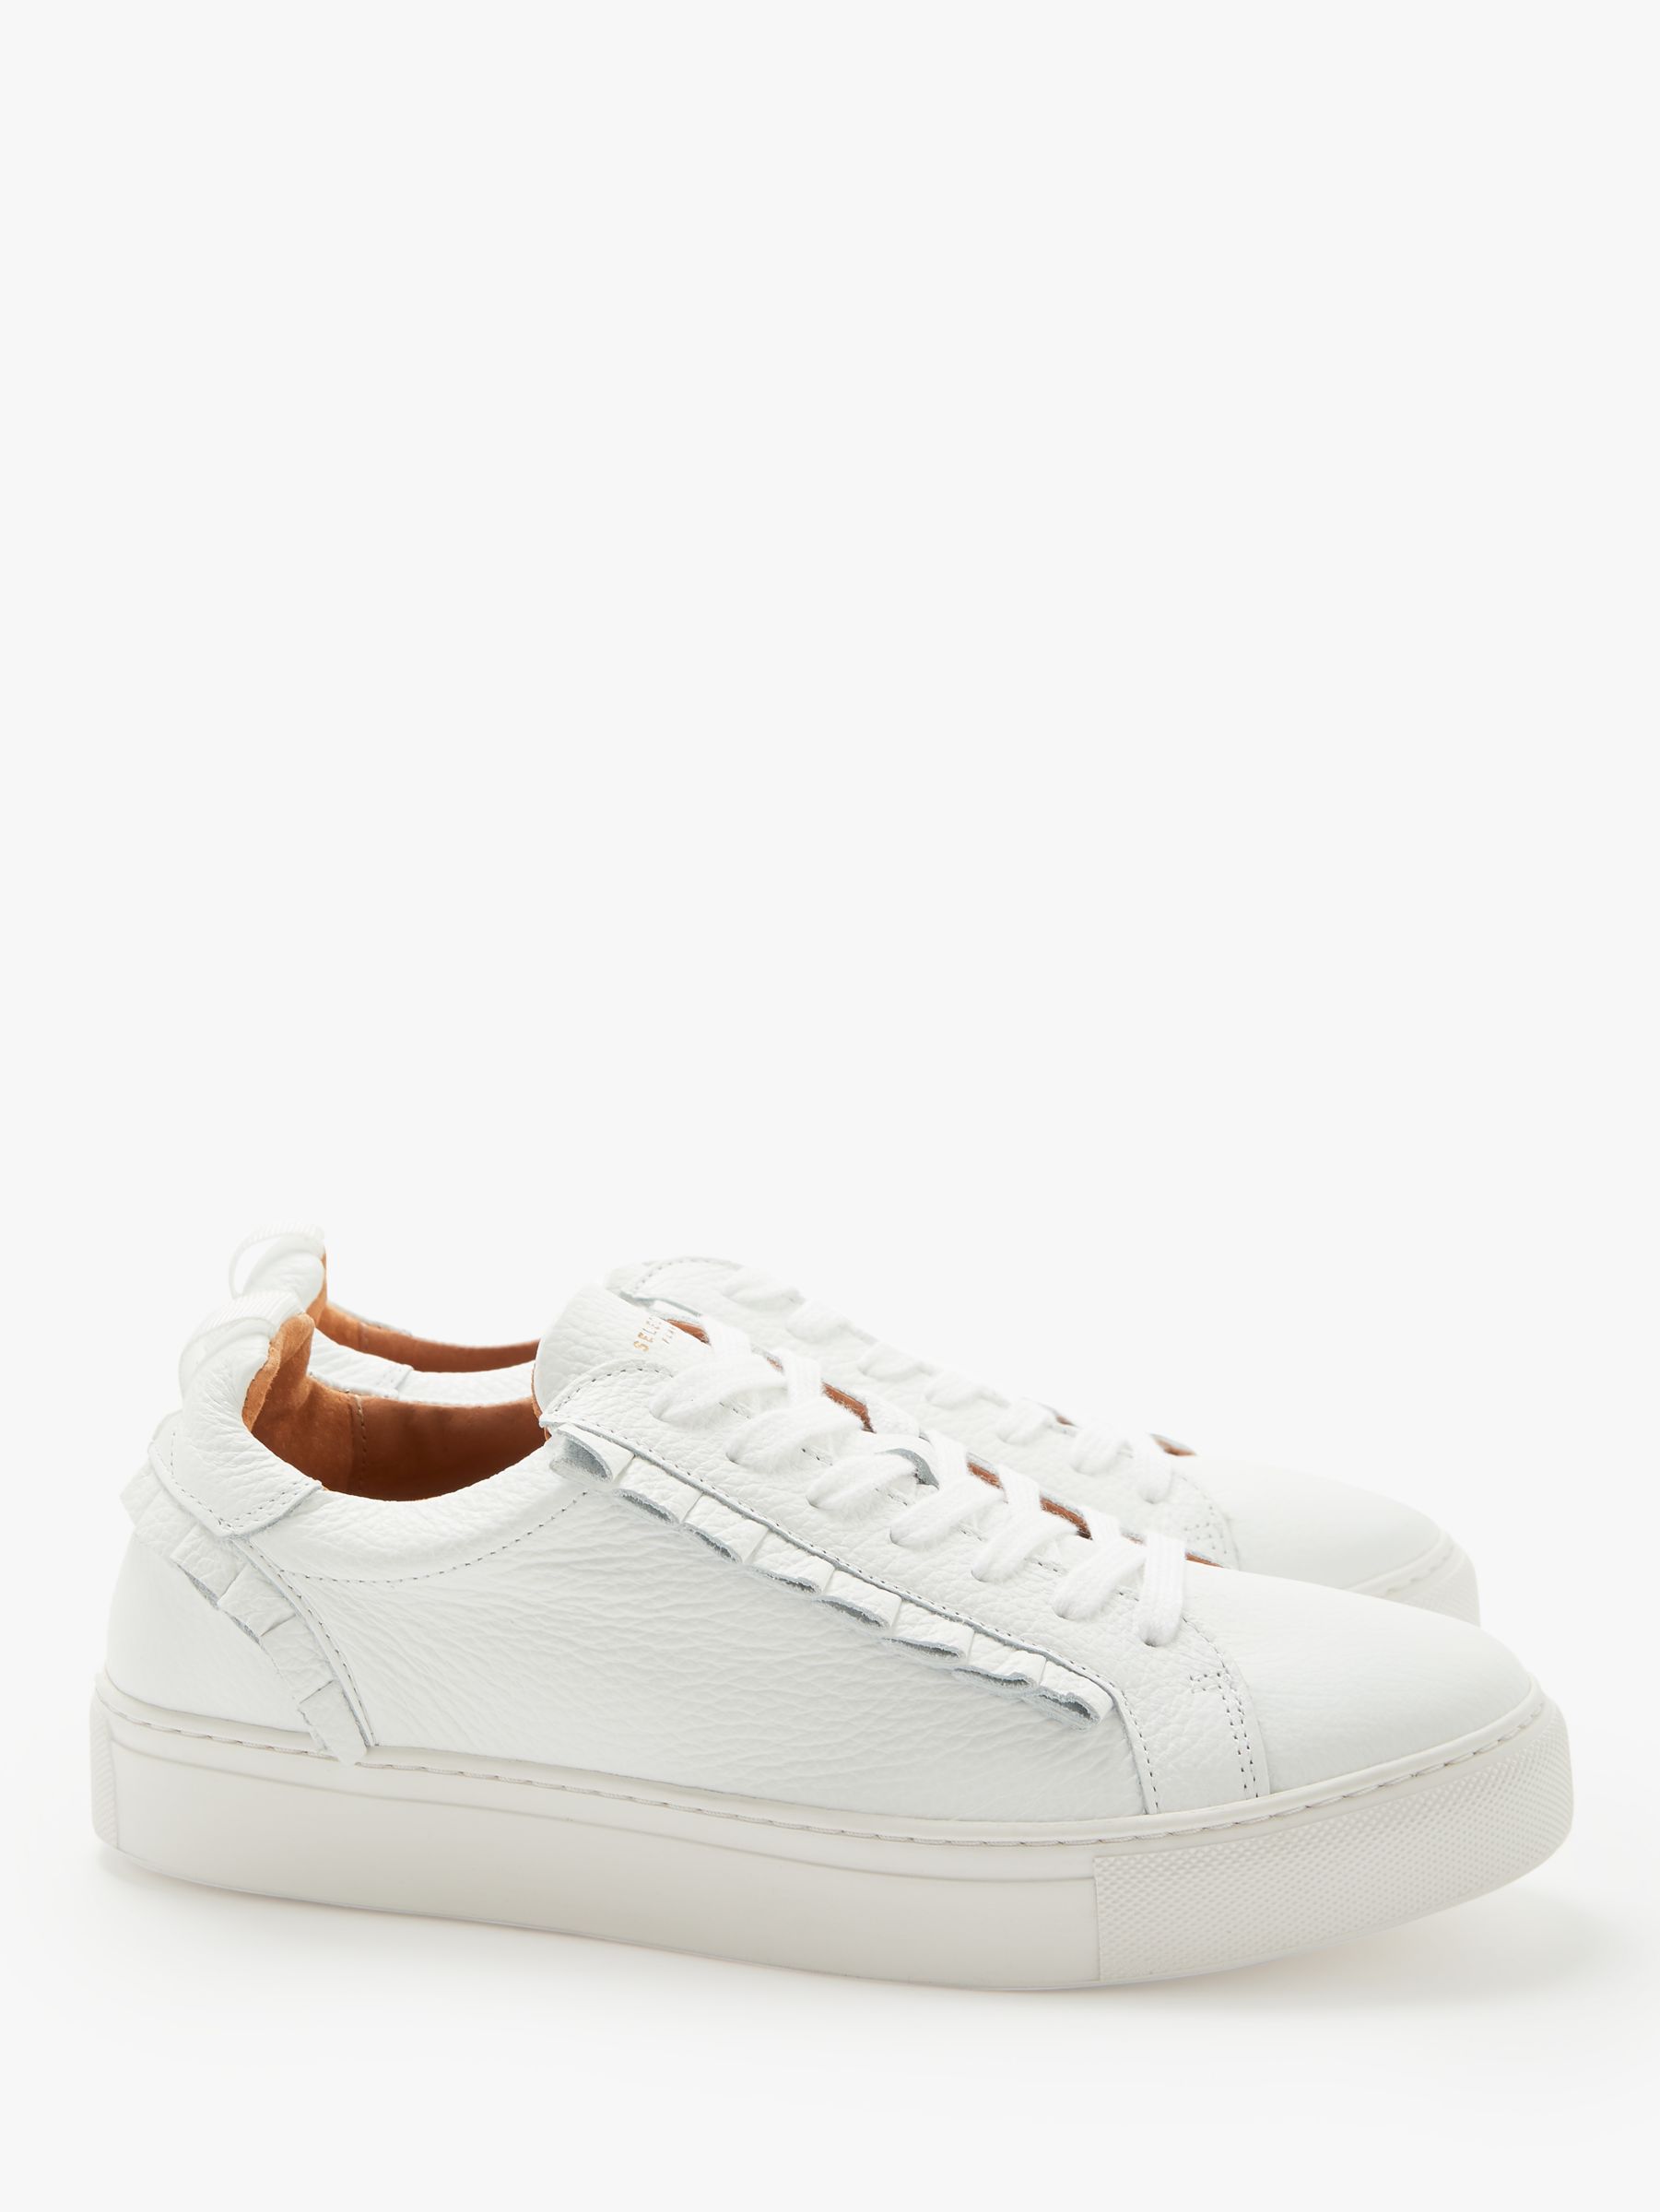 Selected Femme Donna Frills Leather Trainers, White